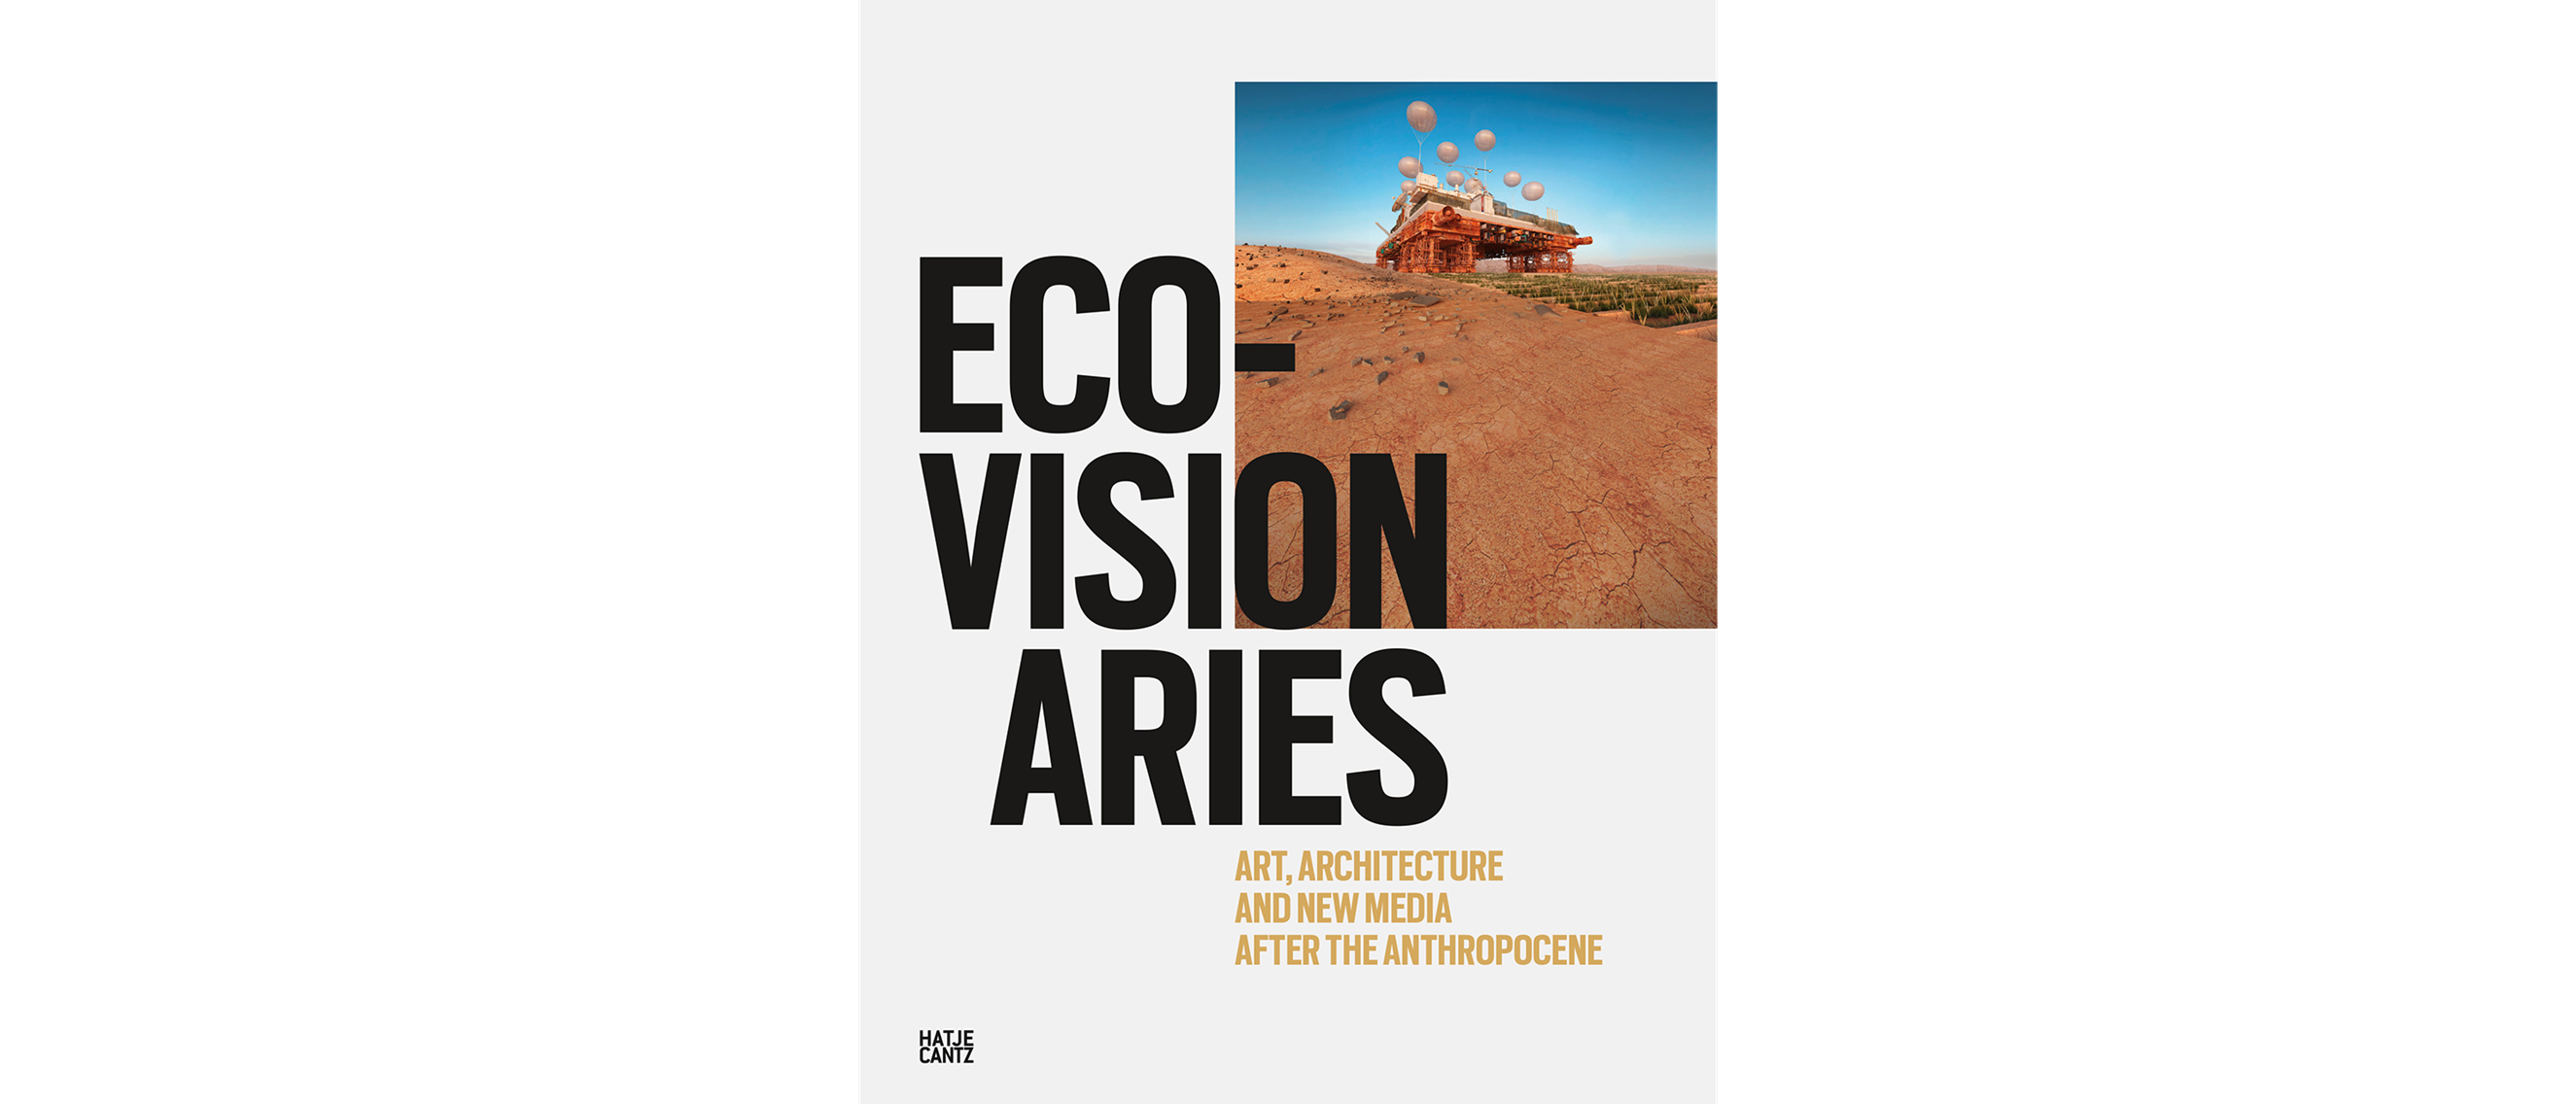 Eco-Visionaries: Art, Architecture, and New Media after the Anthropocene, Hatje Cantz, 2018, ISBN 978-3-7757-4453-9